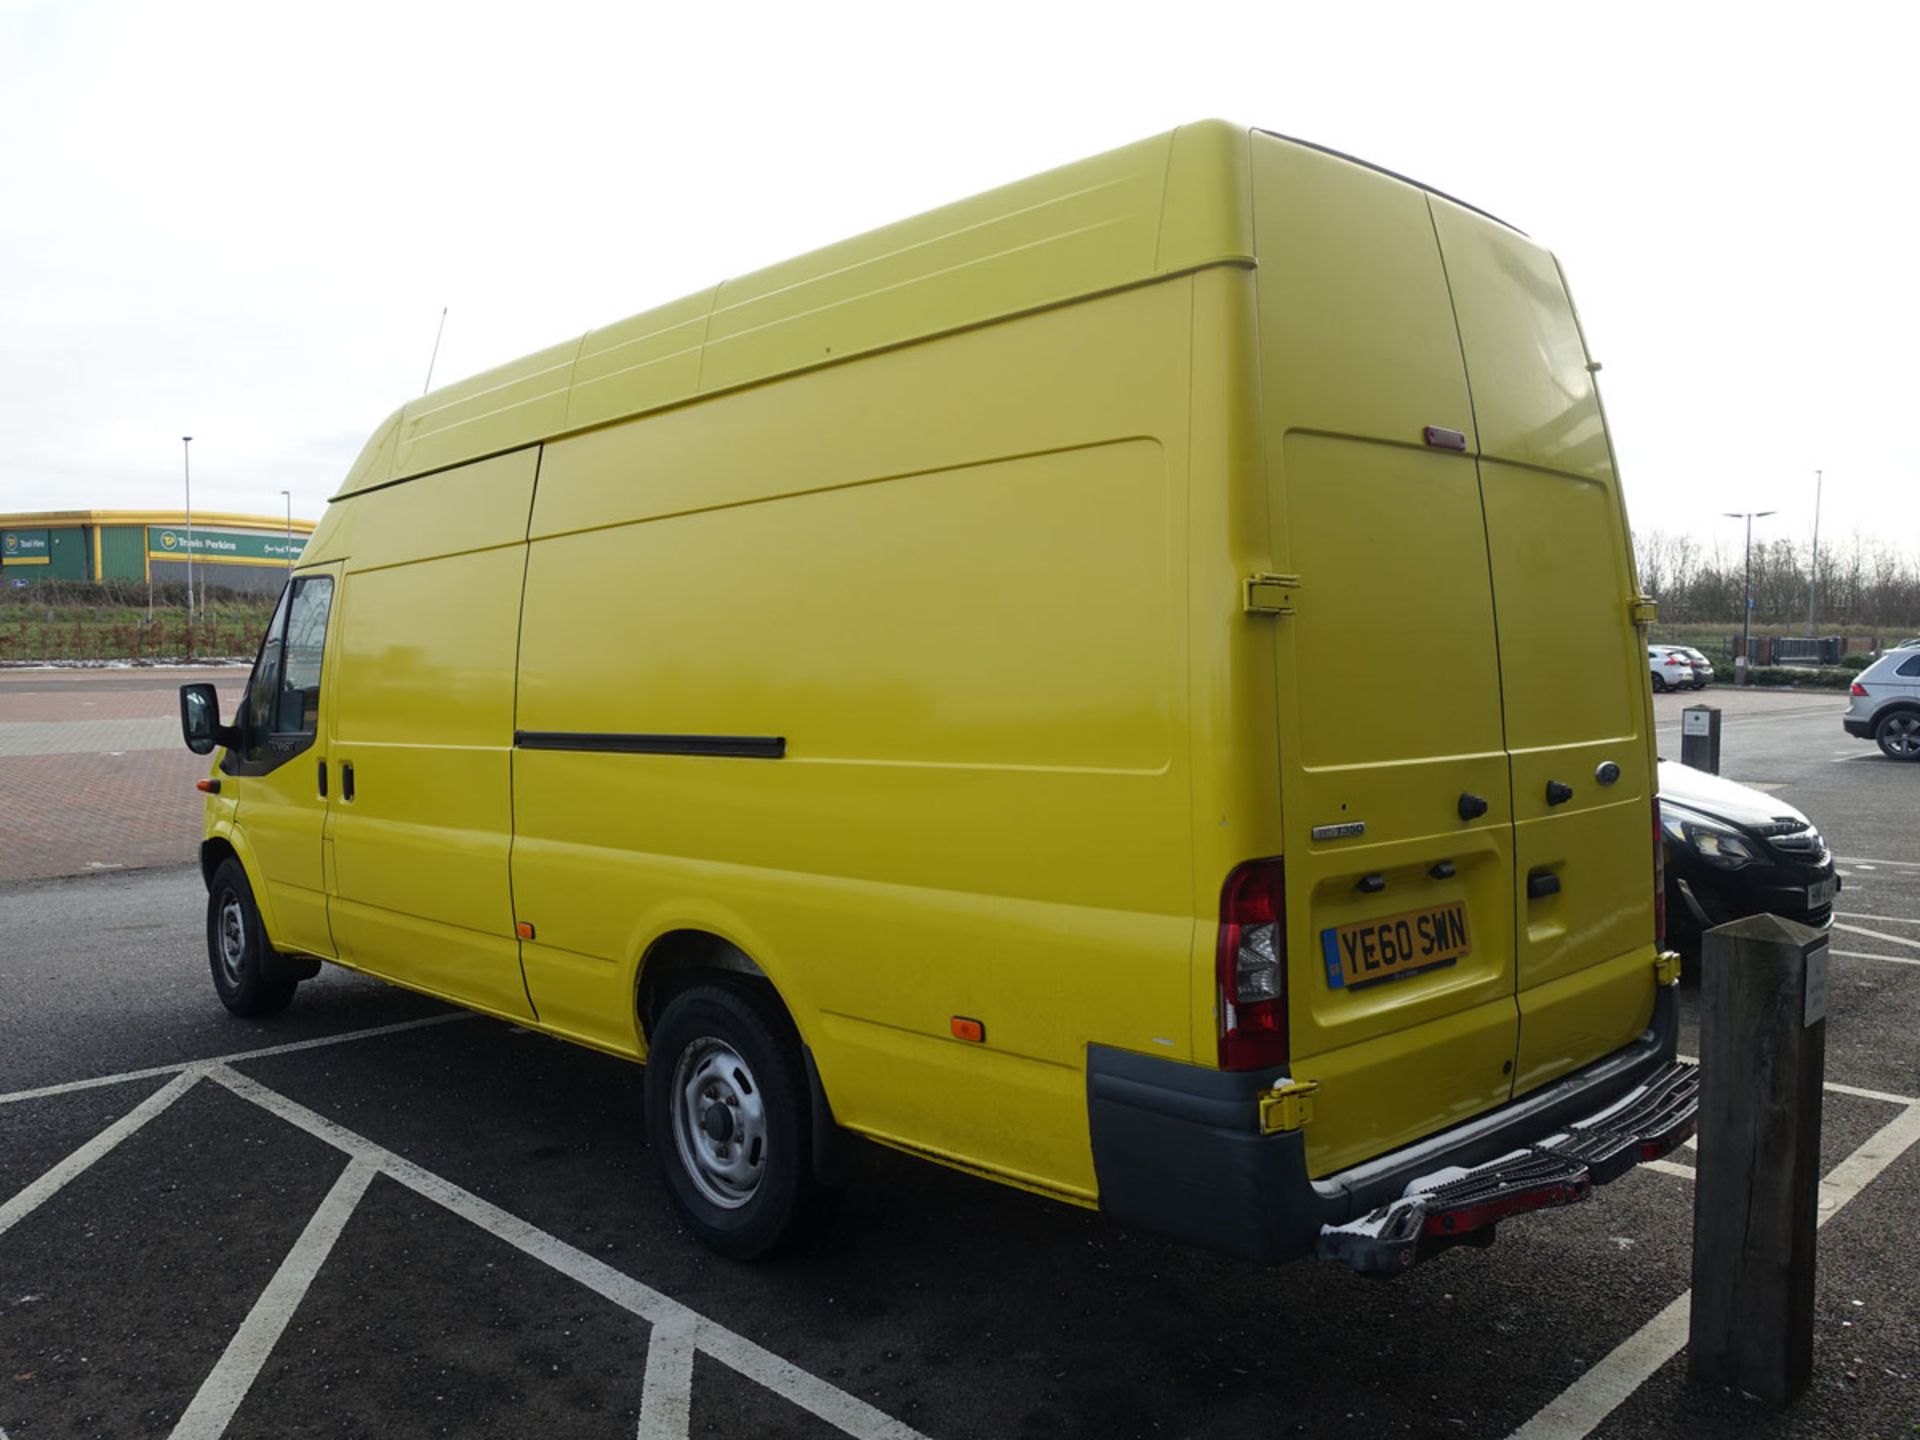 2010 Ford Transit Panel Van in yellow, 2402cc, key and V5 present, first registered 26,11,2010, 3 - Image 4 of 7